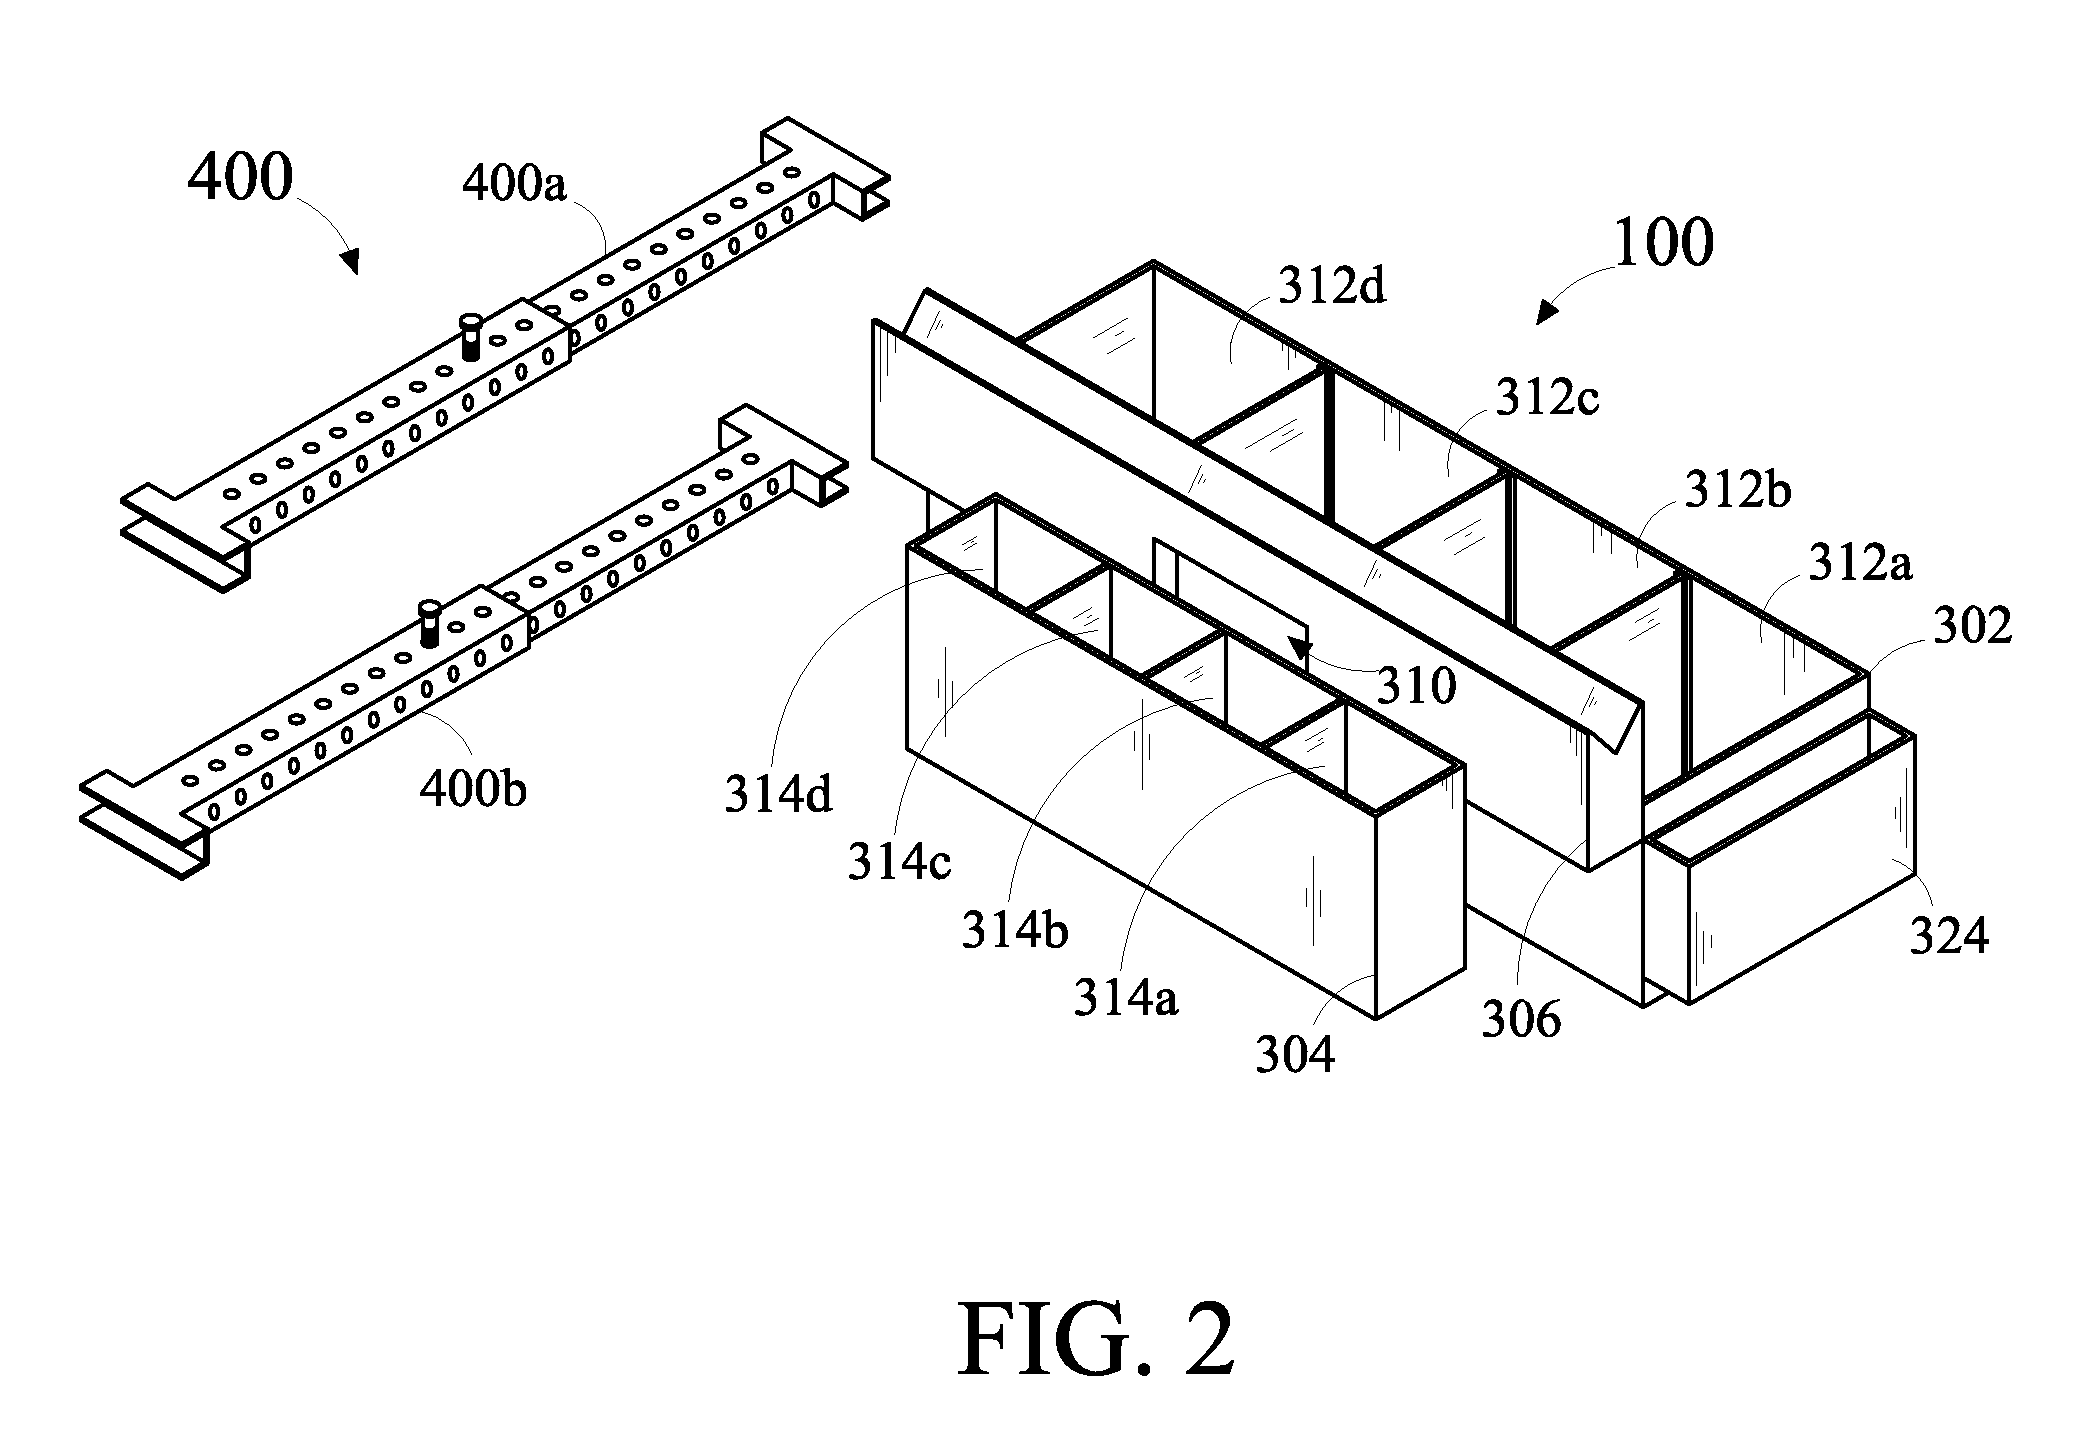 Article holding device for aerial work platform